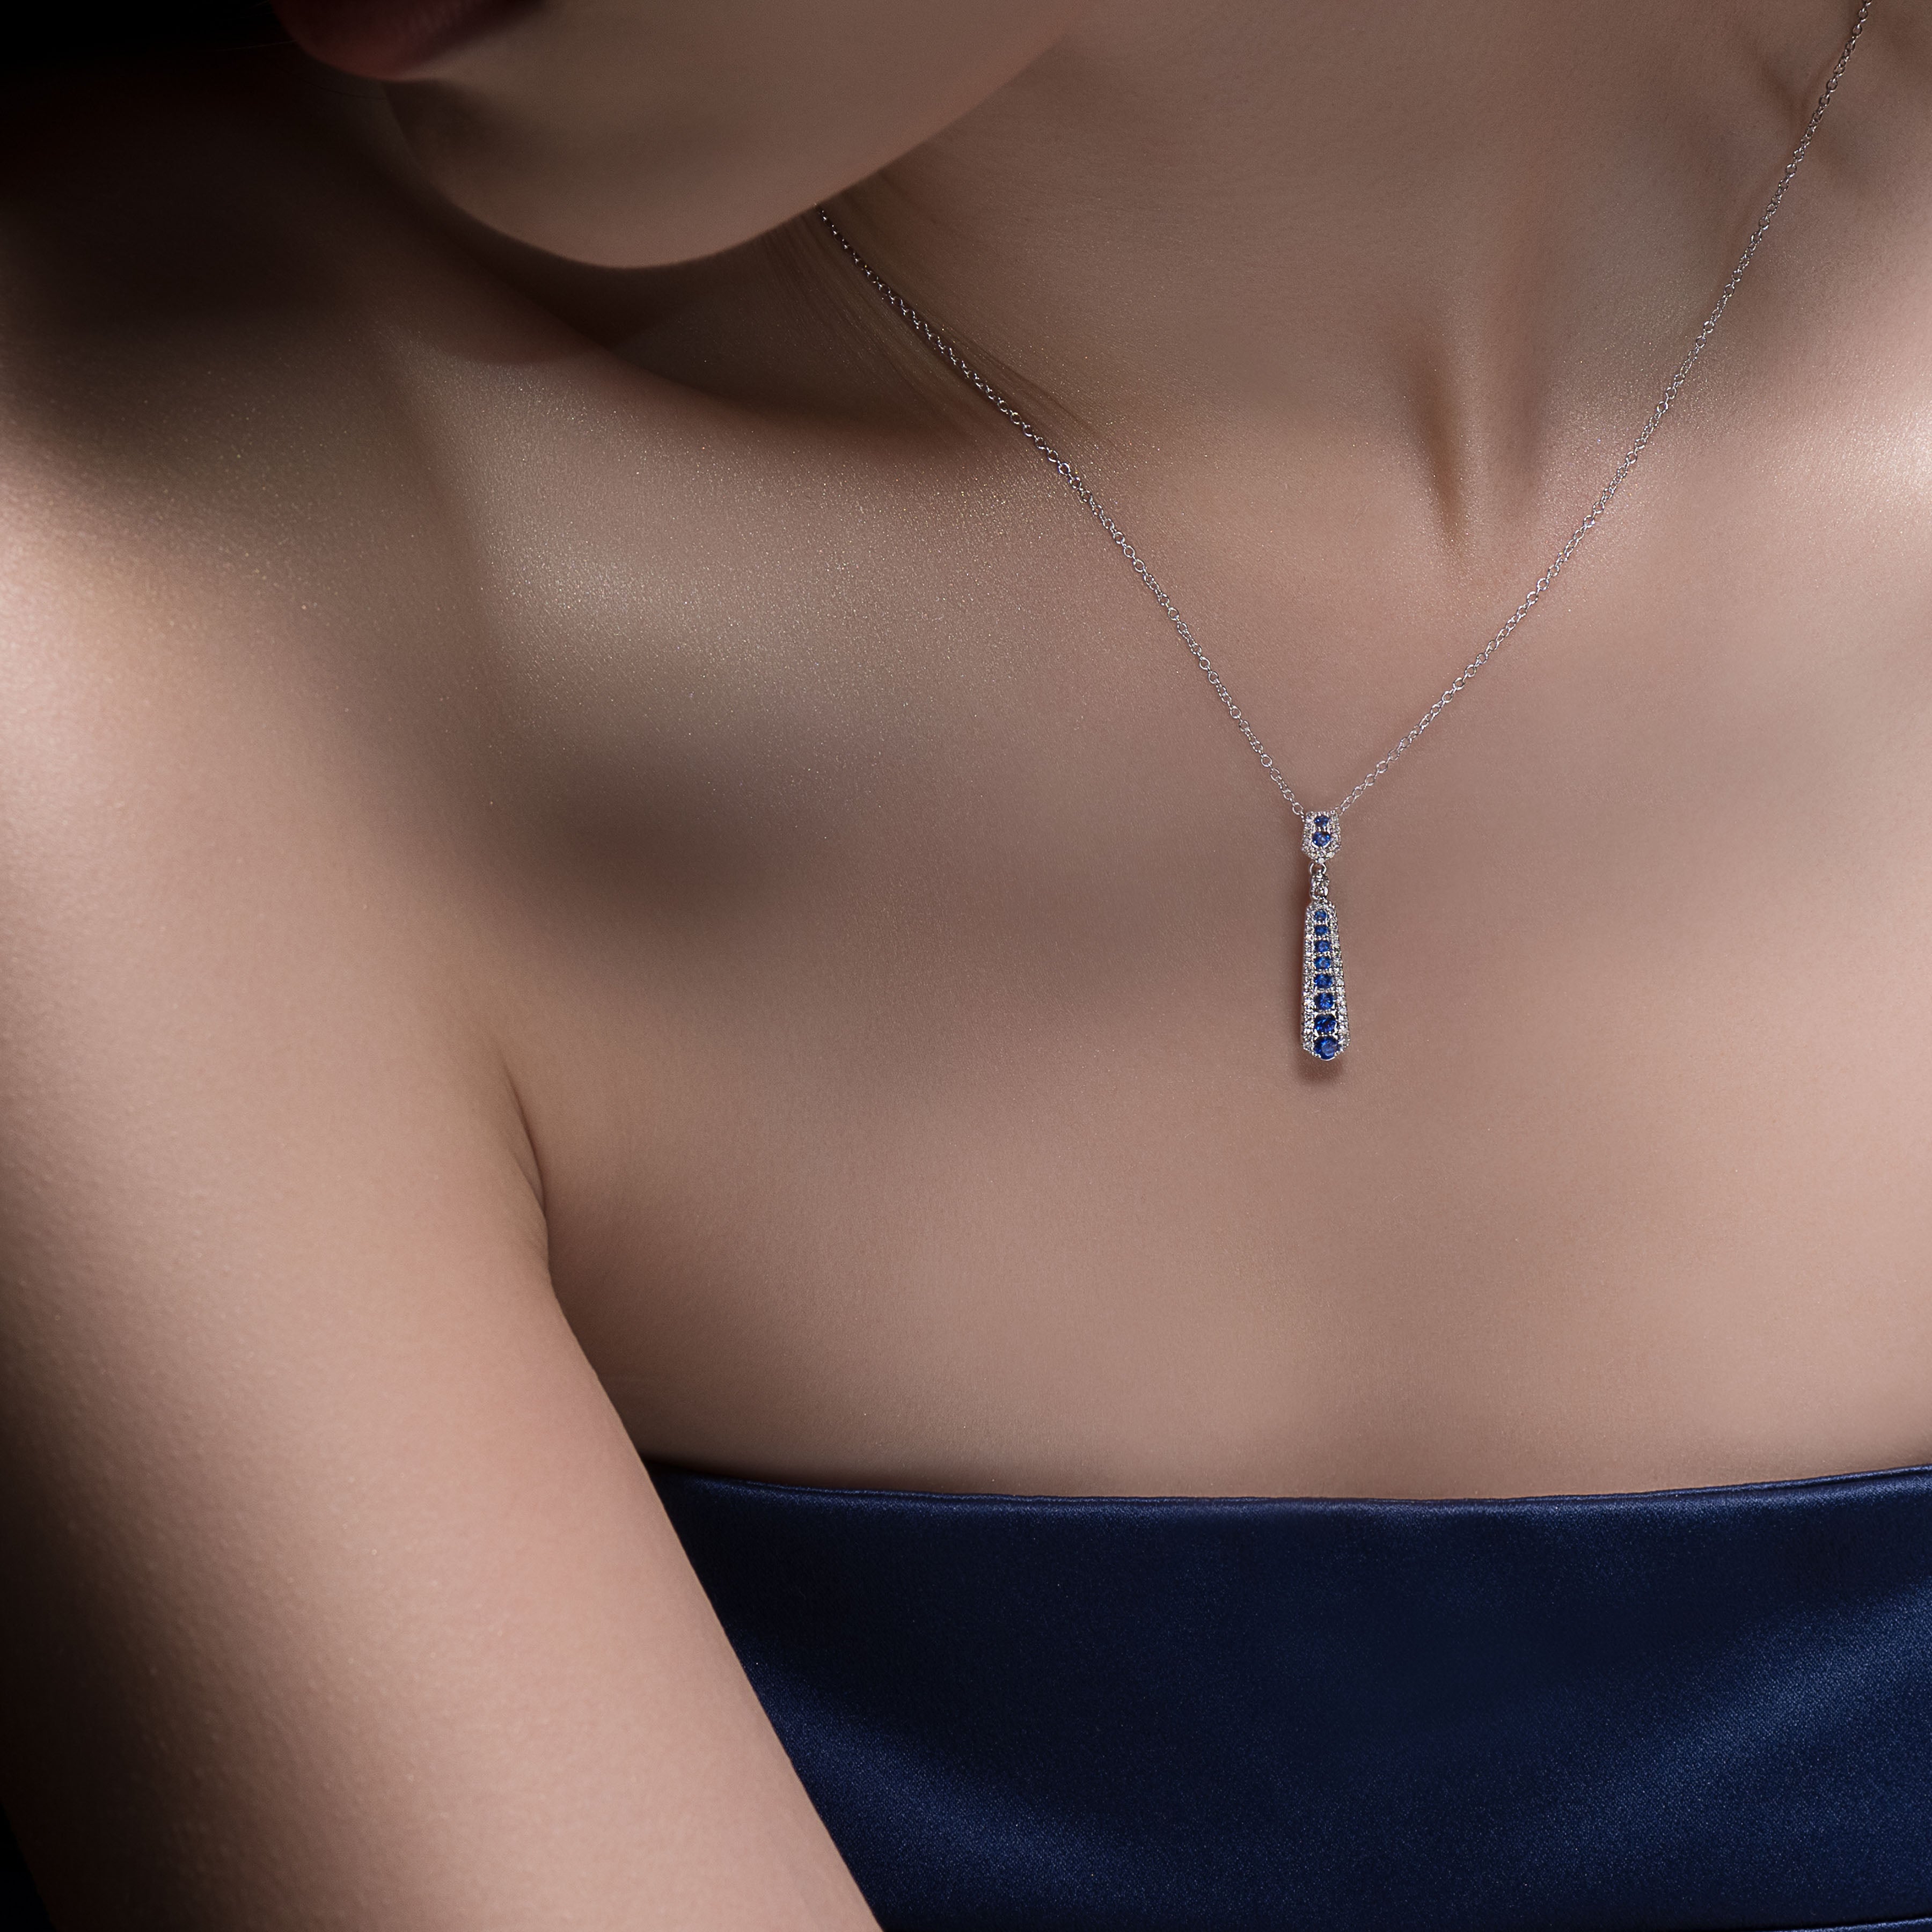 Lady wearing a Adamar Jewels CREENCIA Dulce Necklace in 18K white gold set with sapphire and diamonds